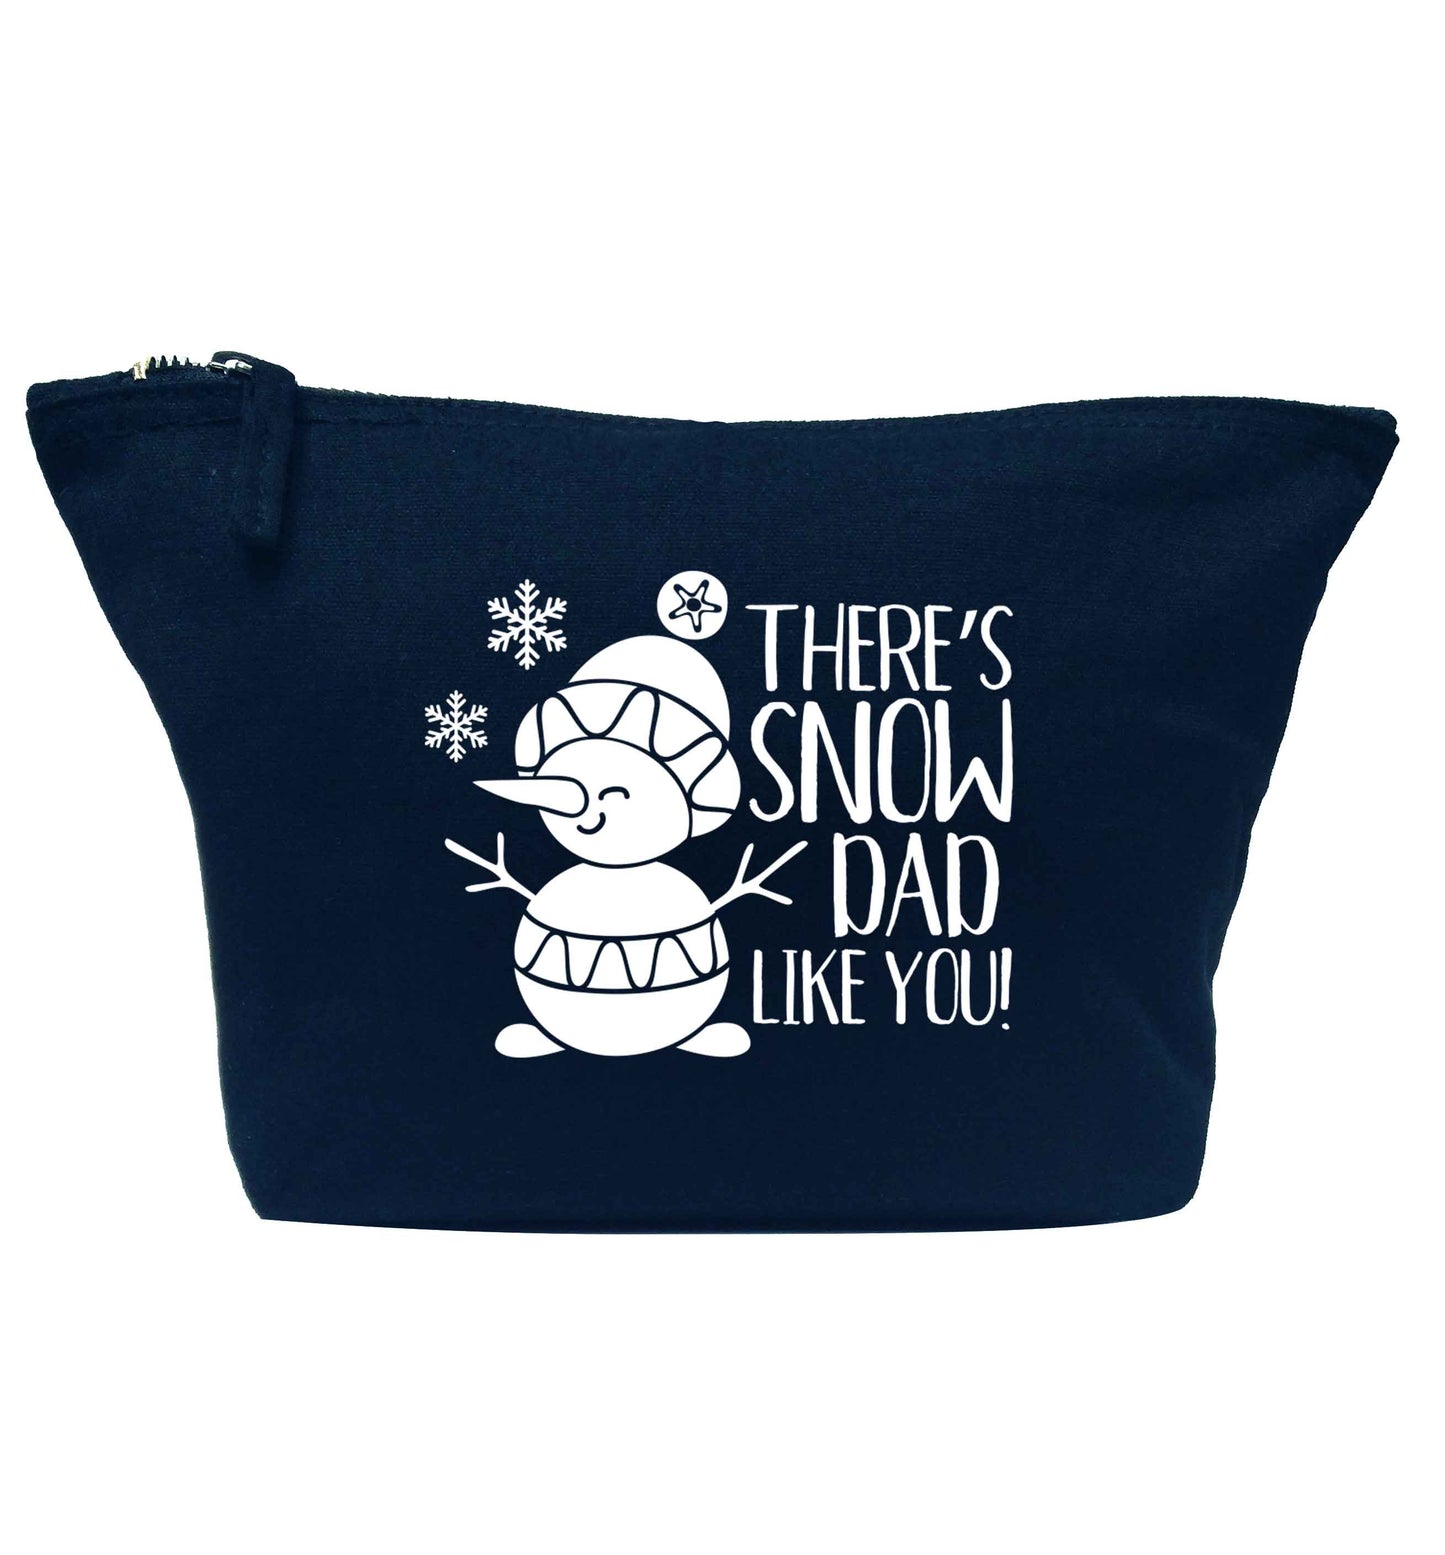 There's snow dad like you navy makeup bag